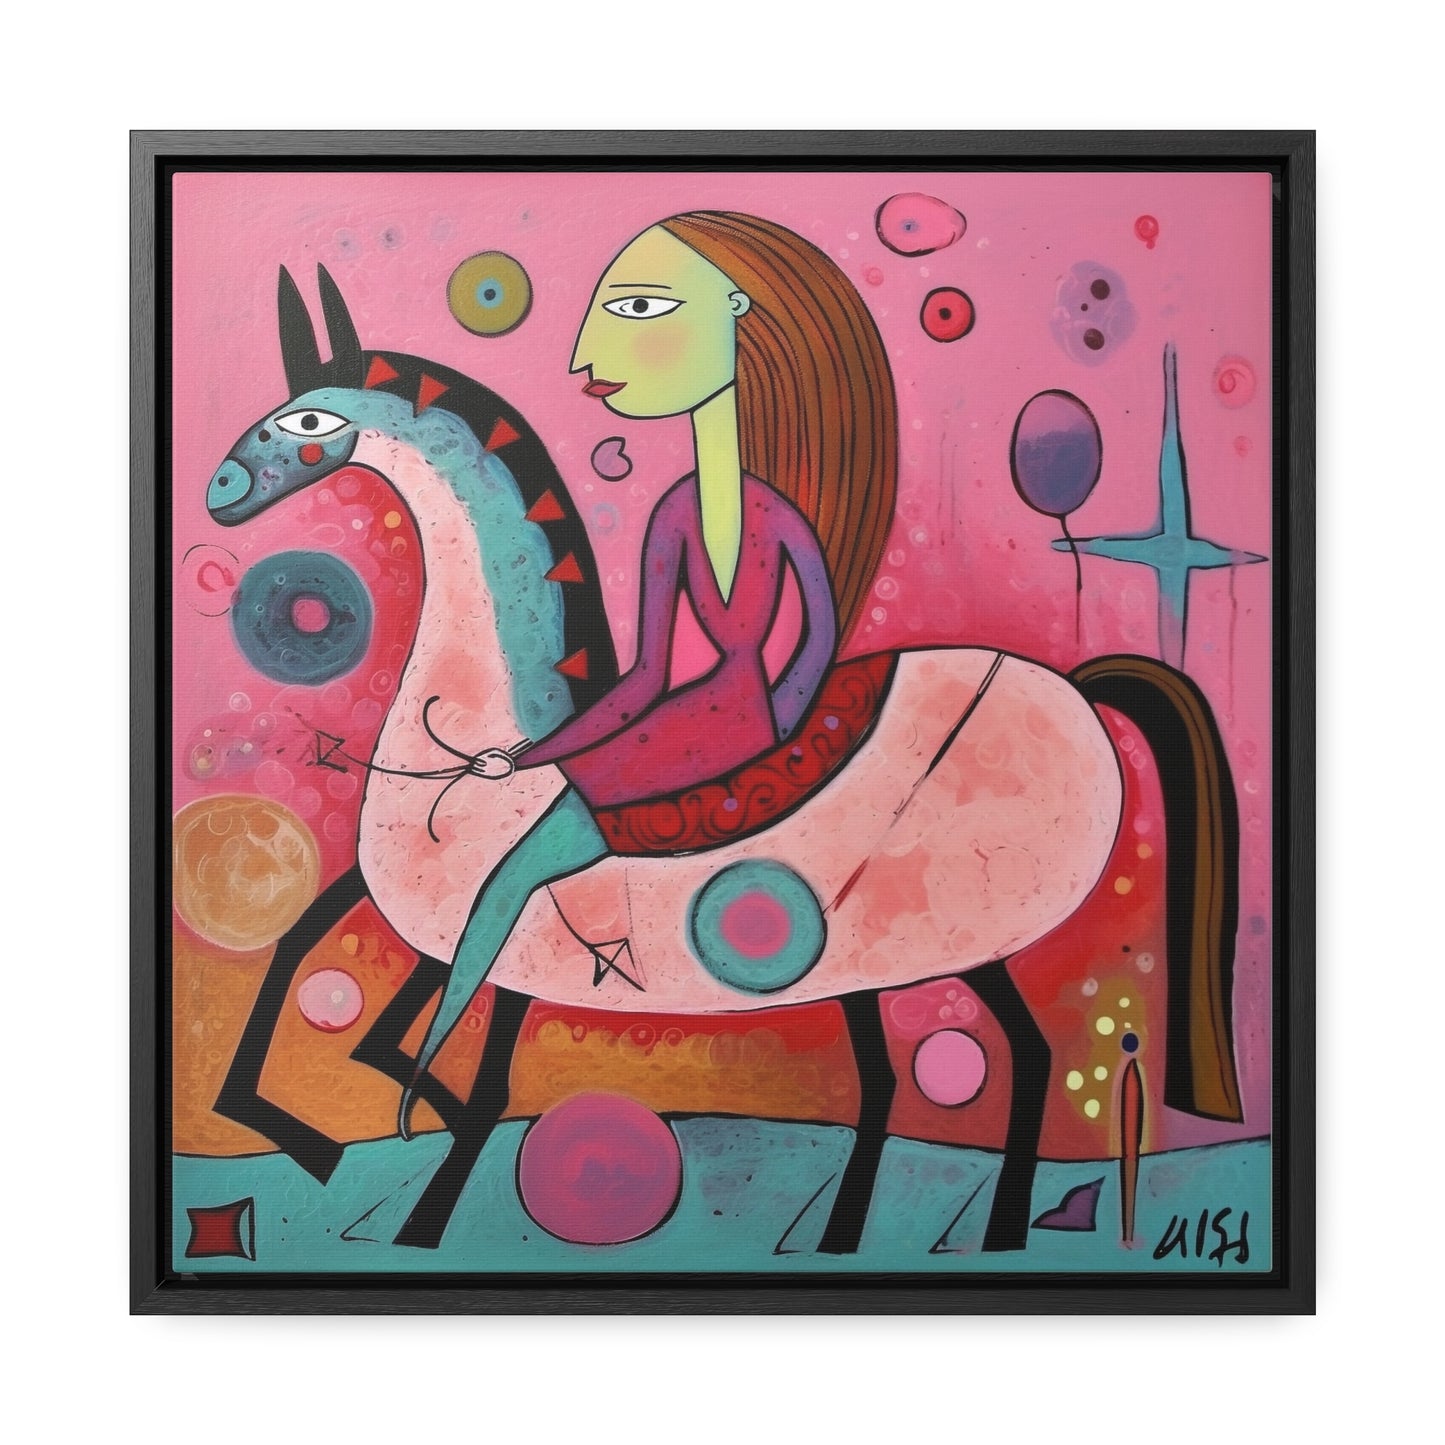 The Dreams of the Child 59, Gallery Canvas Wraps, Square Frame